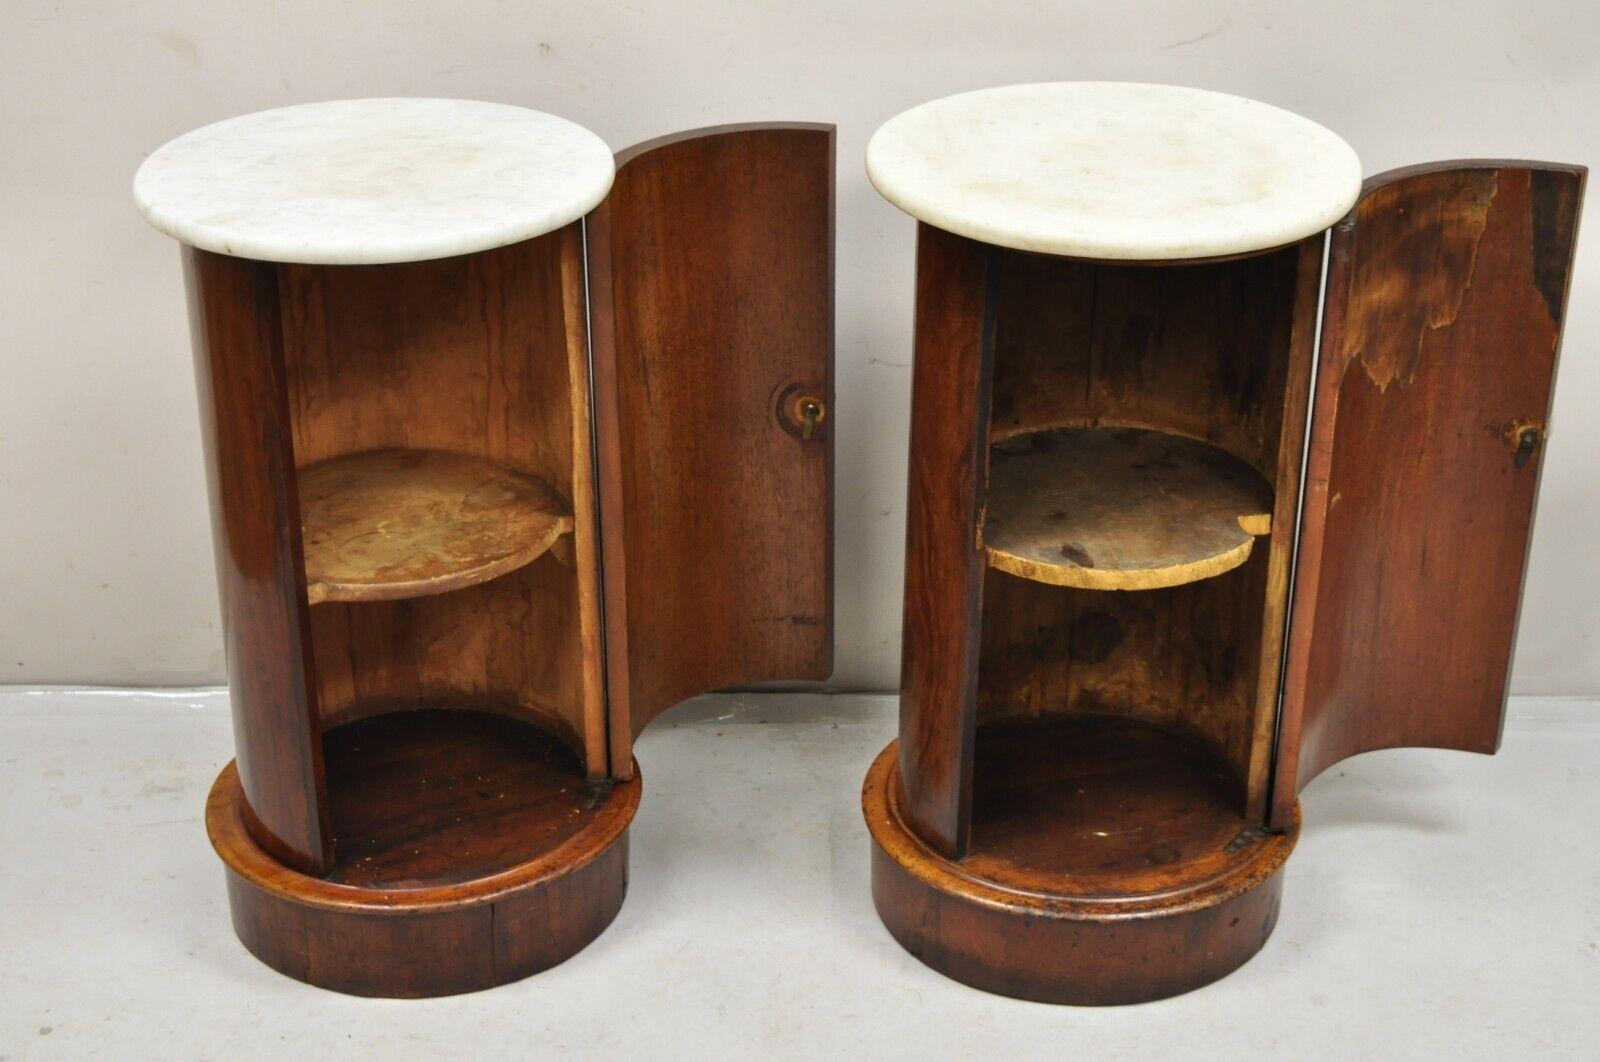 19th C Biedermeier Mahogany Marble Top One Door Side Table Cabinet - a Pair. Item features round marble tops, unique column pedestal form, beautiful mahogany wood grain, one interior shelf, very nice antique pair. Circa Mid to Late